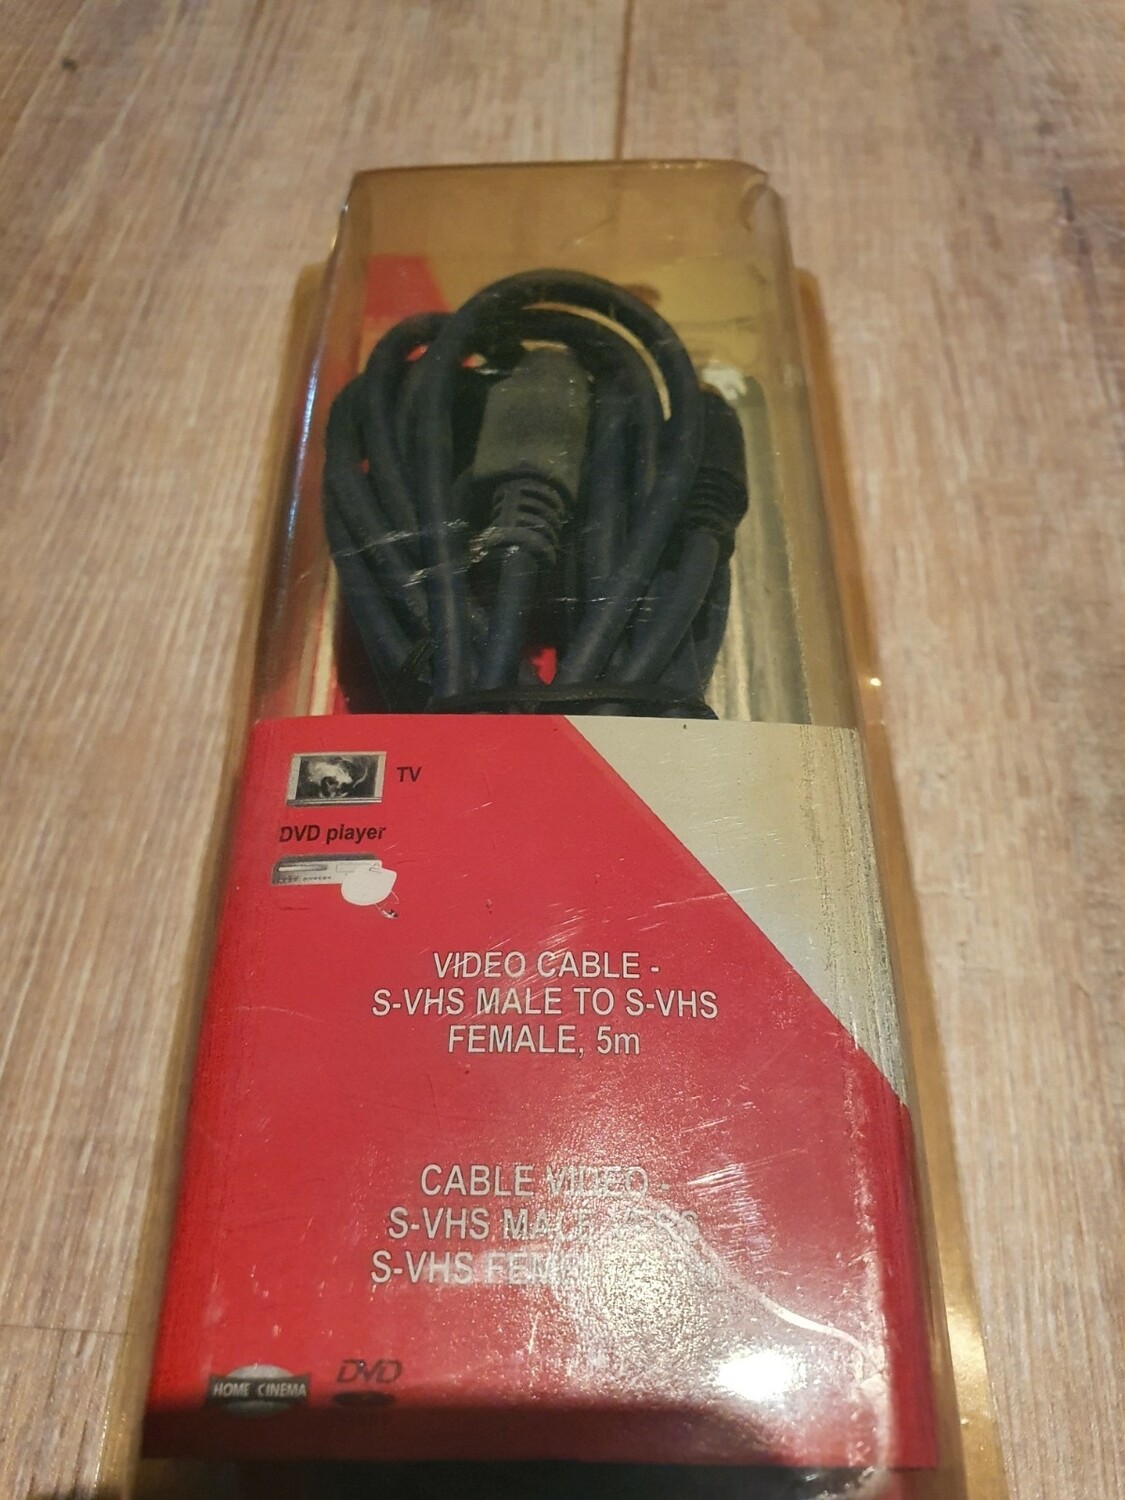 Video cable S-vhs 5m